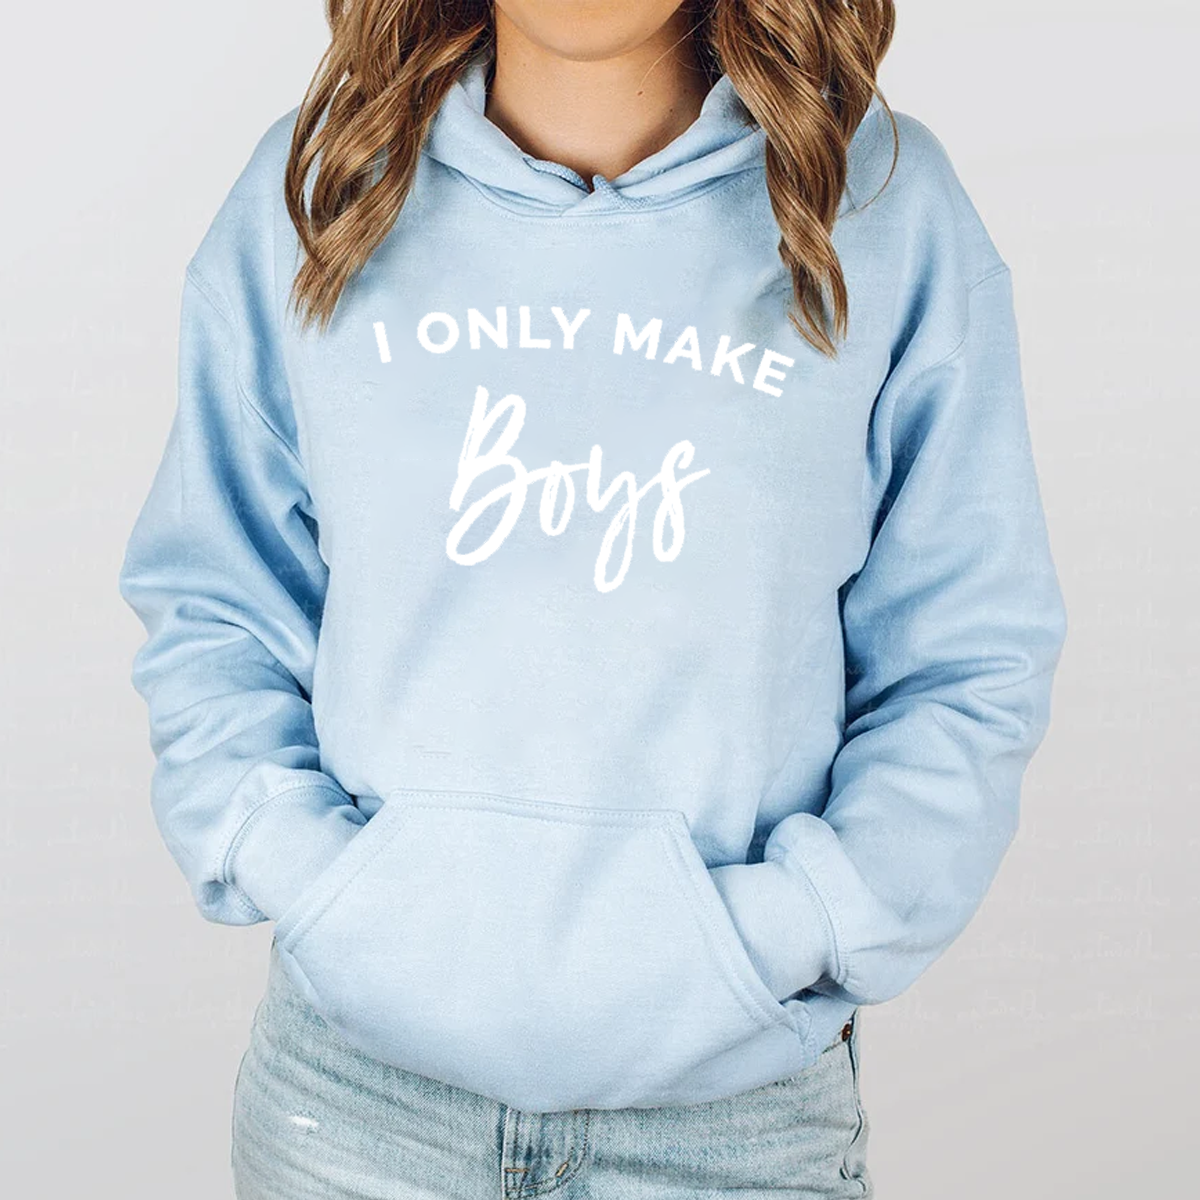 I only make boys - Baby Blue Hoodie